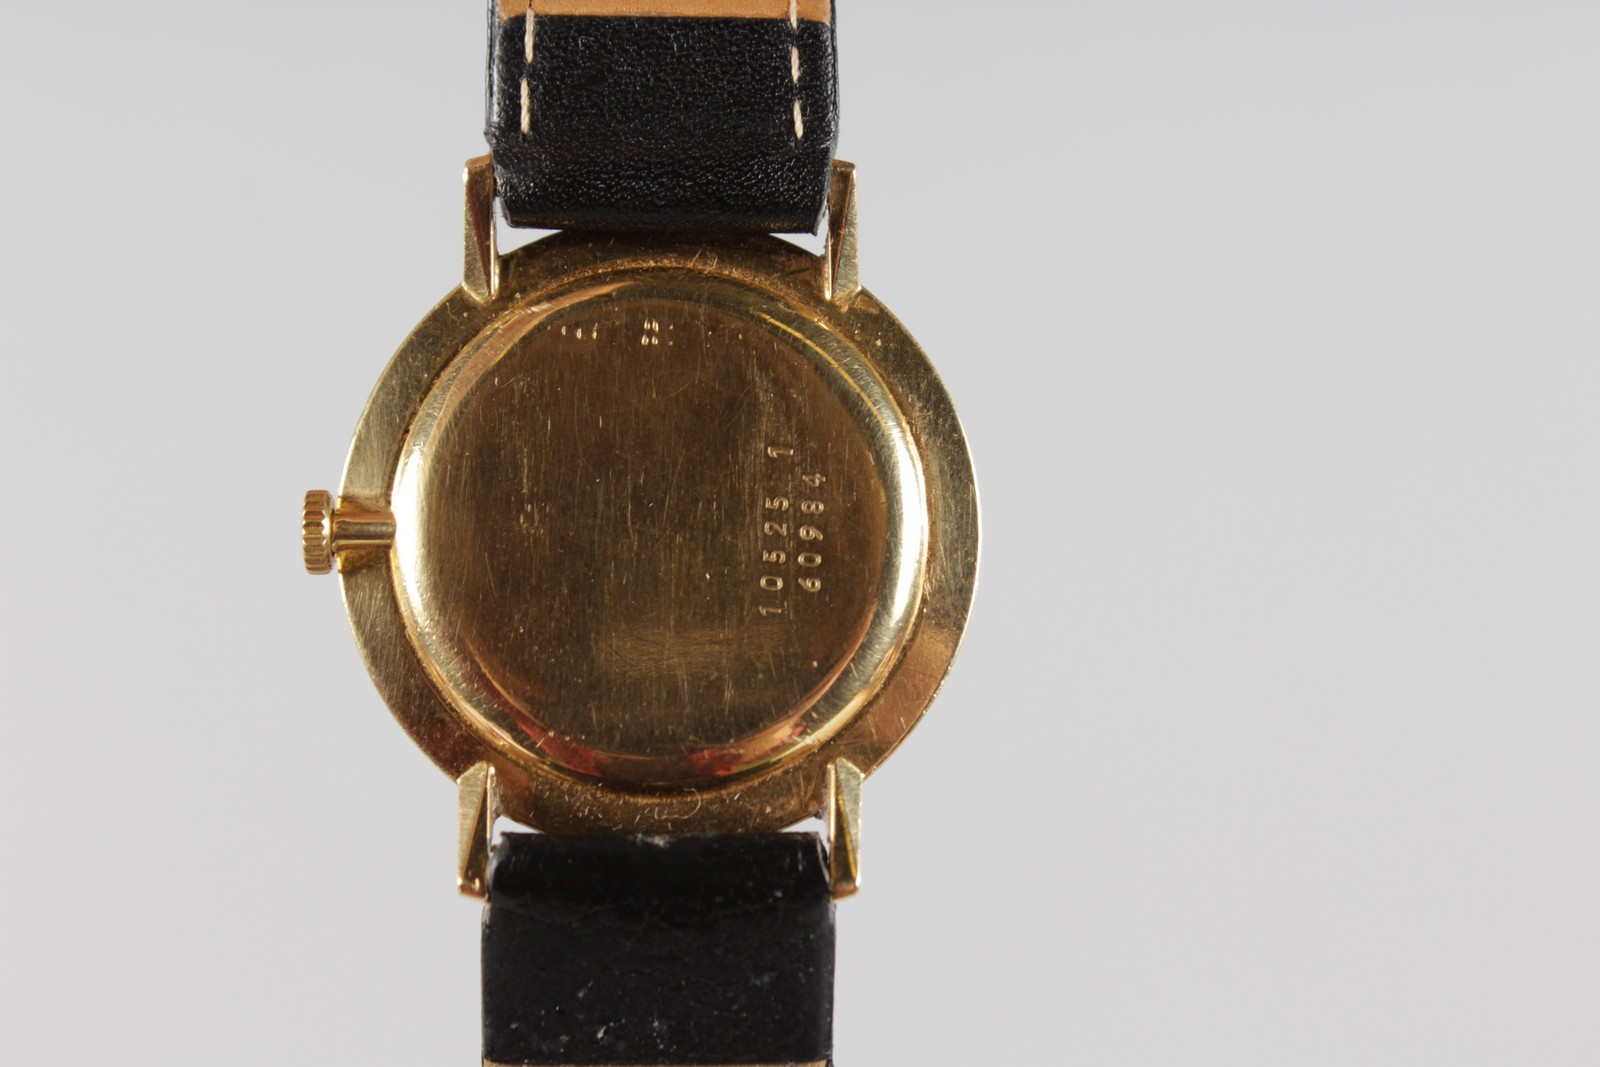 A GENTLEMAN'S V. BUECHE GIROD BIENNE 18CT YELLOW GOLD WRISTWATCH with leather strap, in a red box. - Image 3 of 5